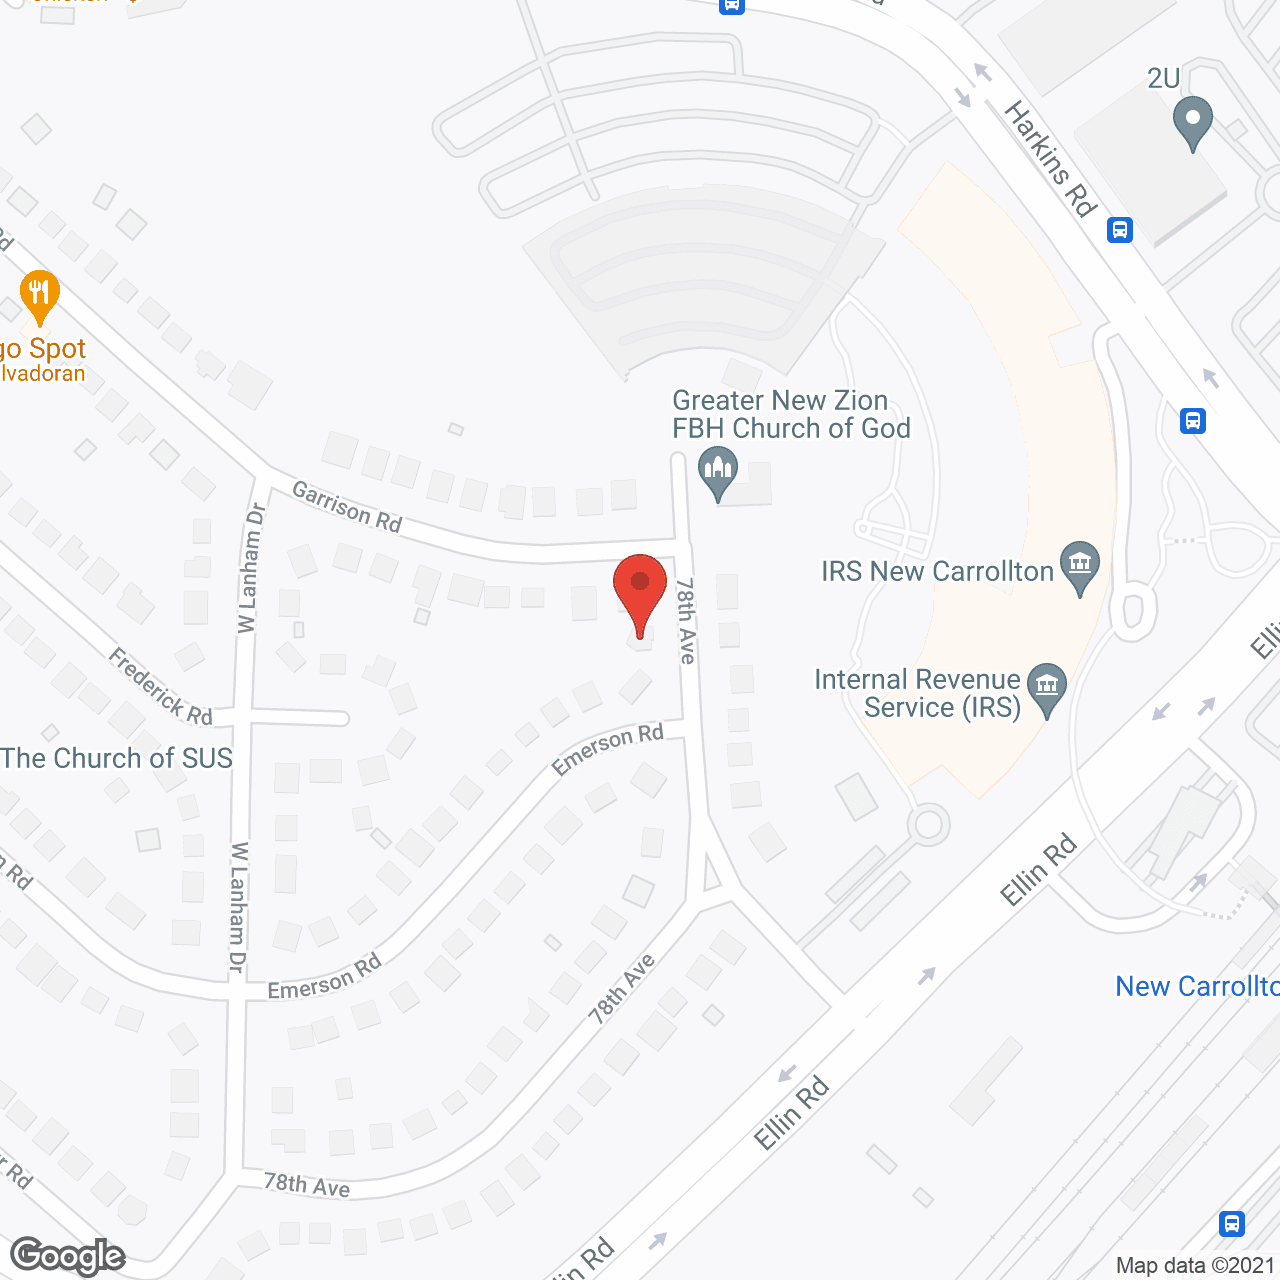 Luminous Care Services in google map